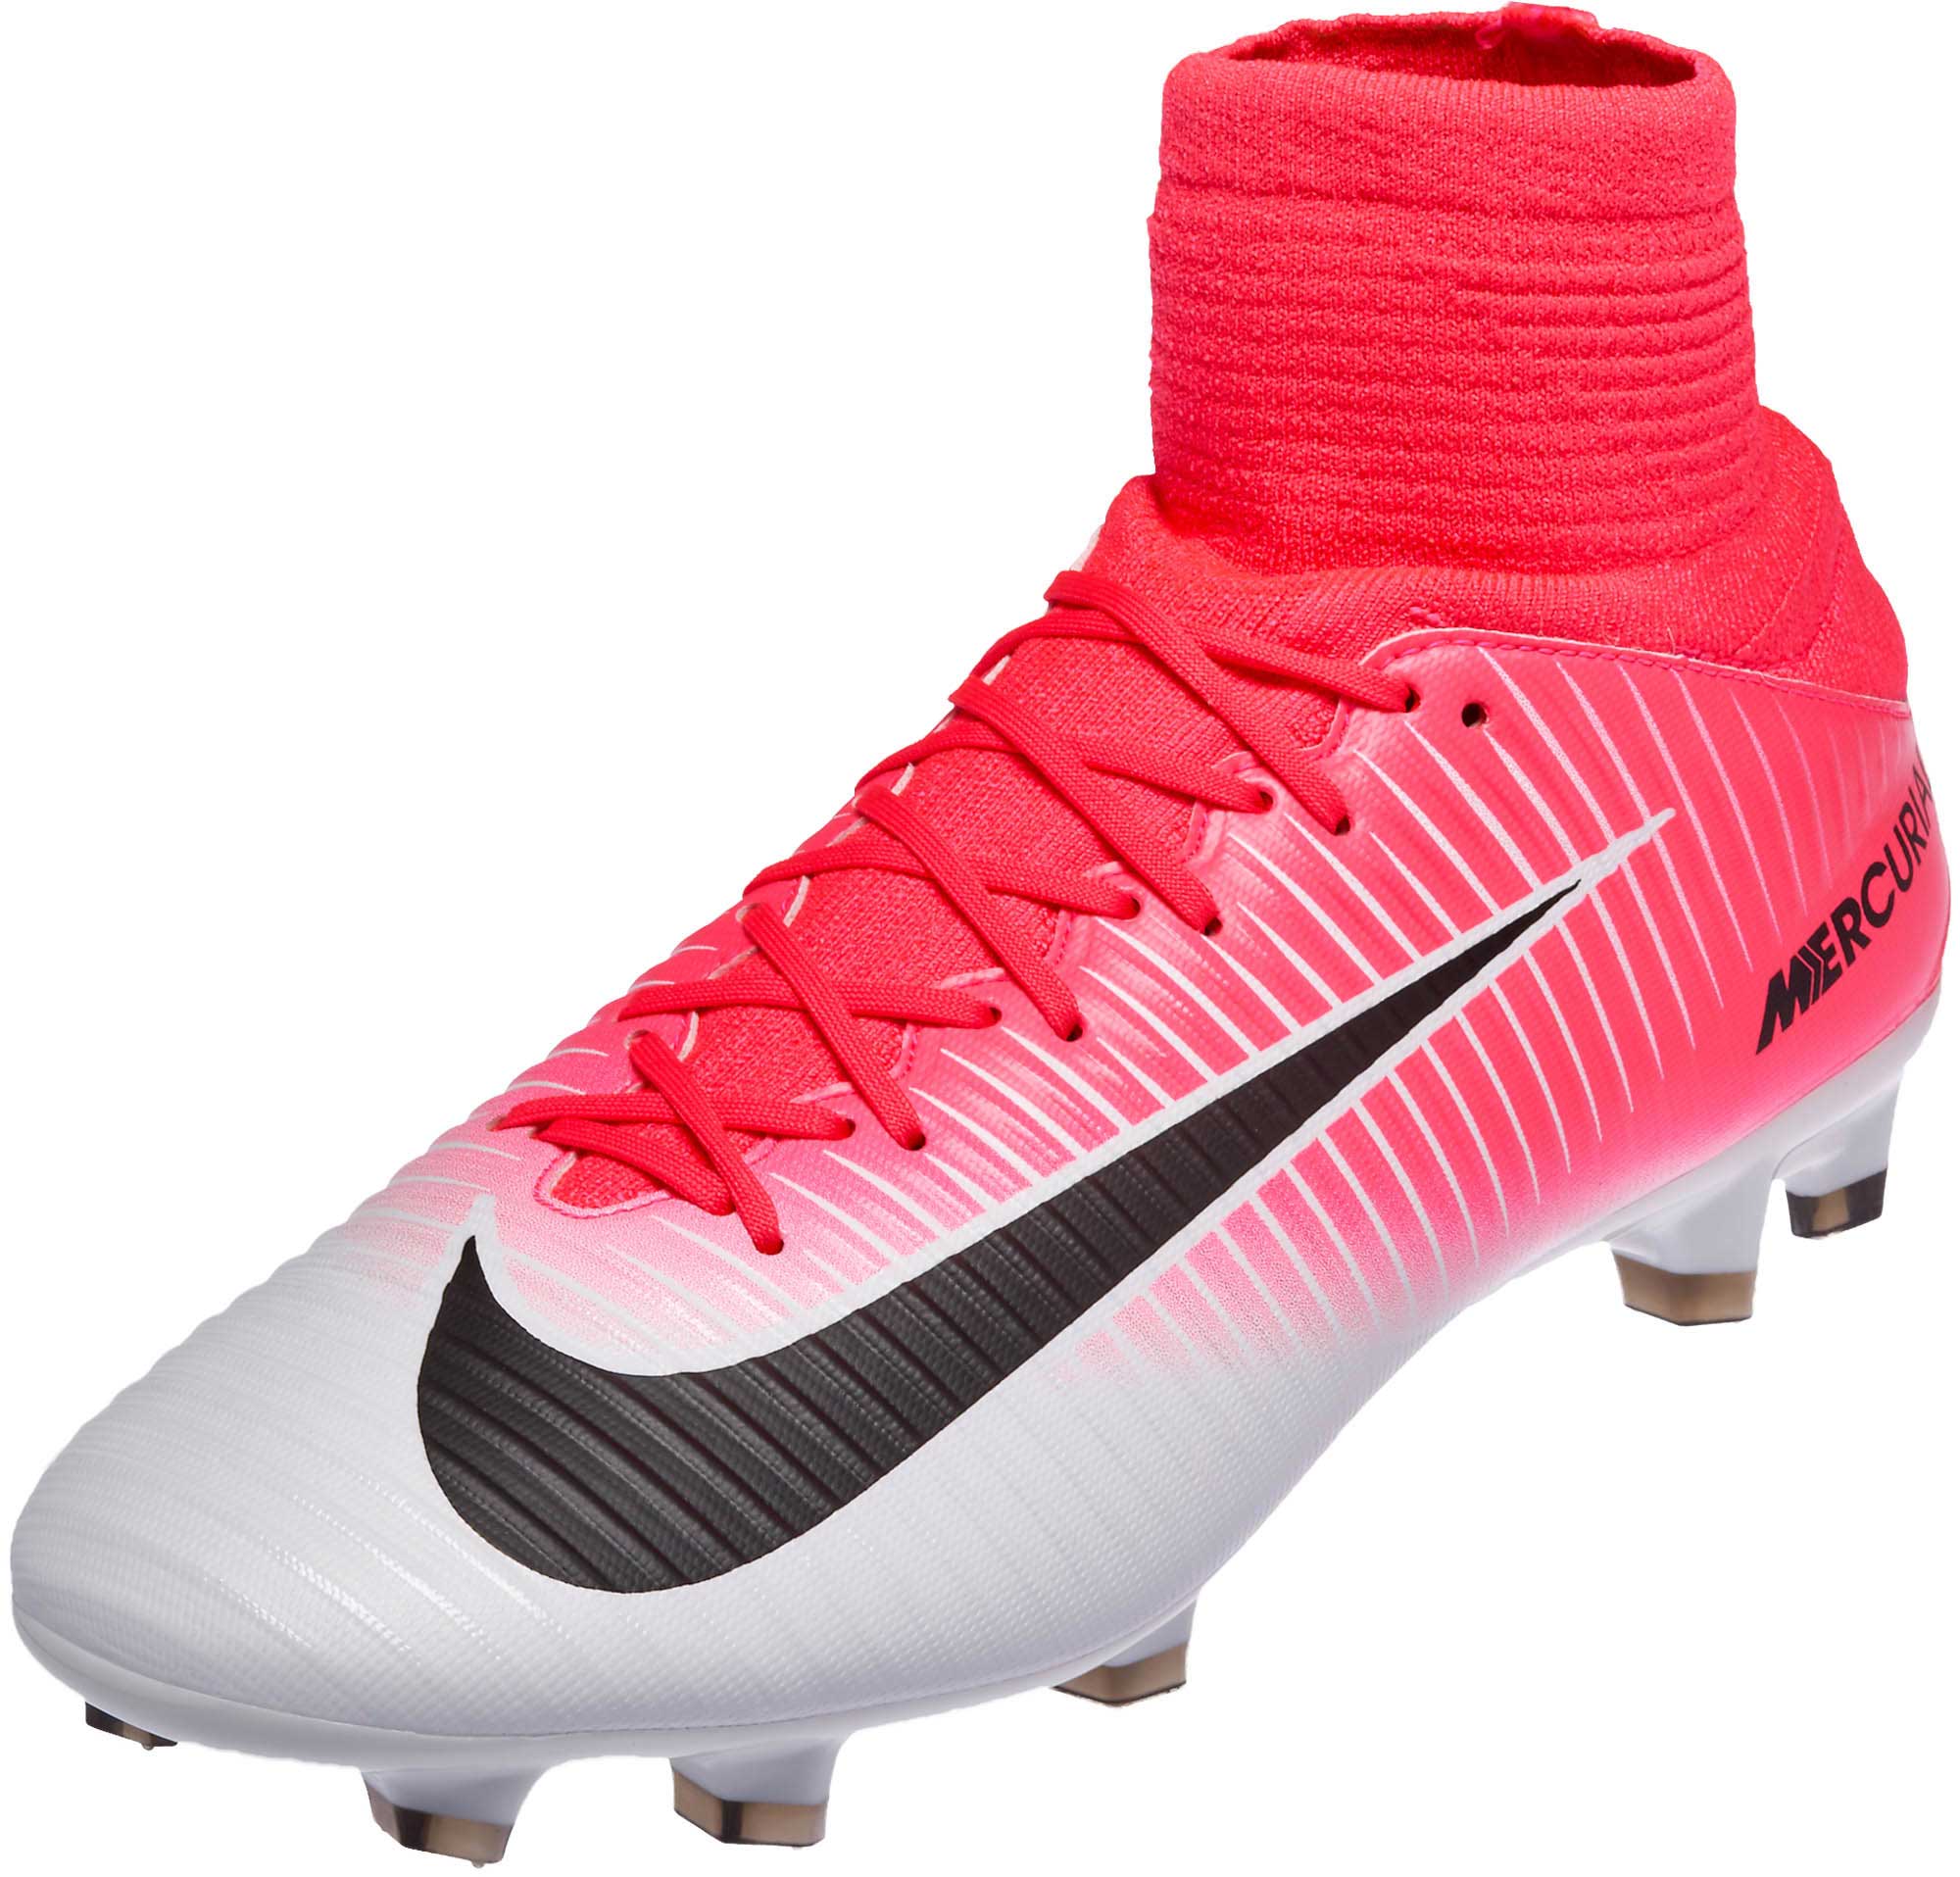 nike soccer cleats pink